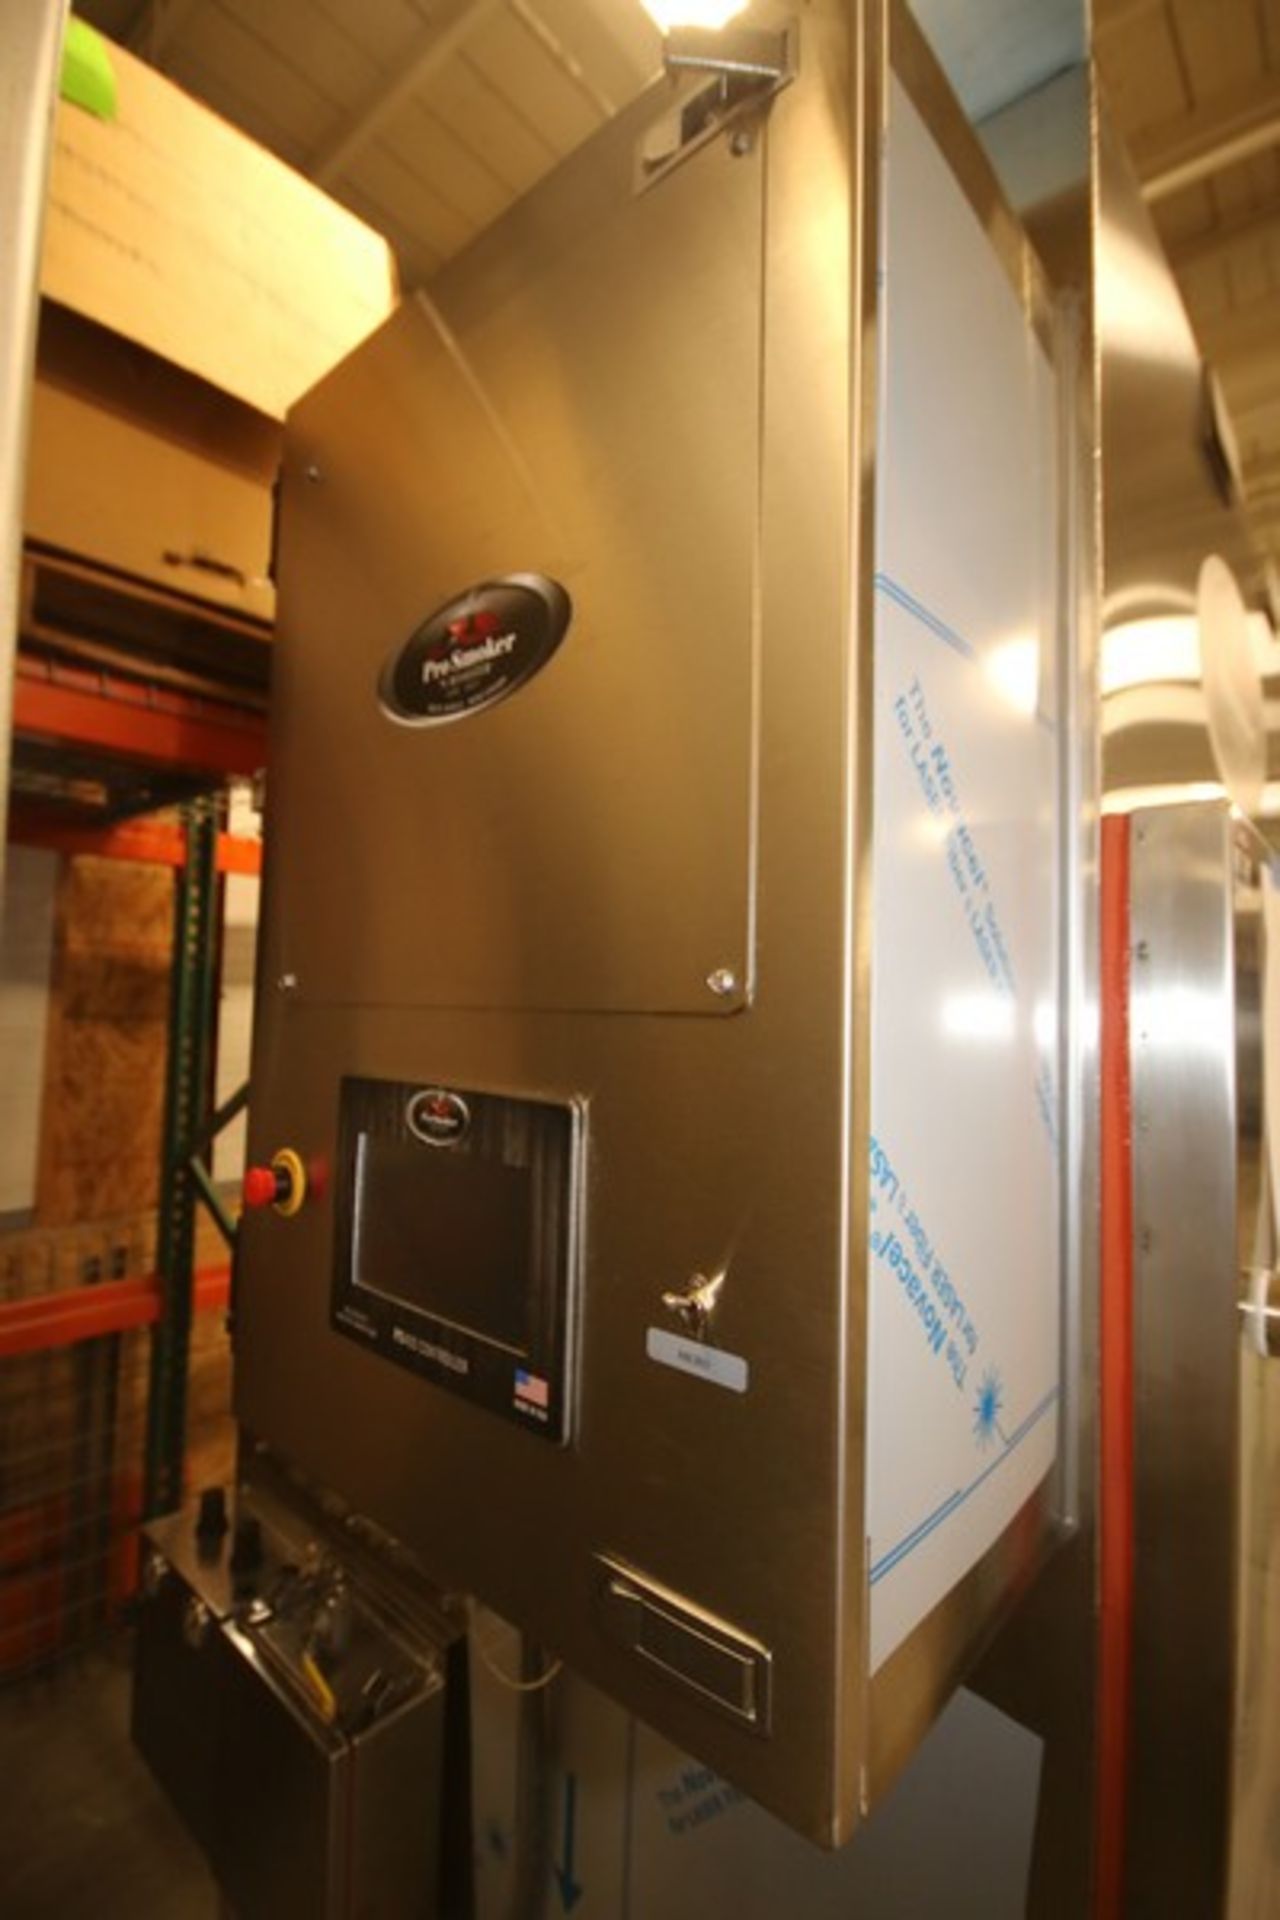 New 2019 Pro Smoker N’ Roaster, Model 500T, SN PSW 006475, Inside Dimensions 40" D x 62" H x 40" - Image 6 of 8